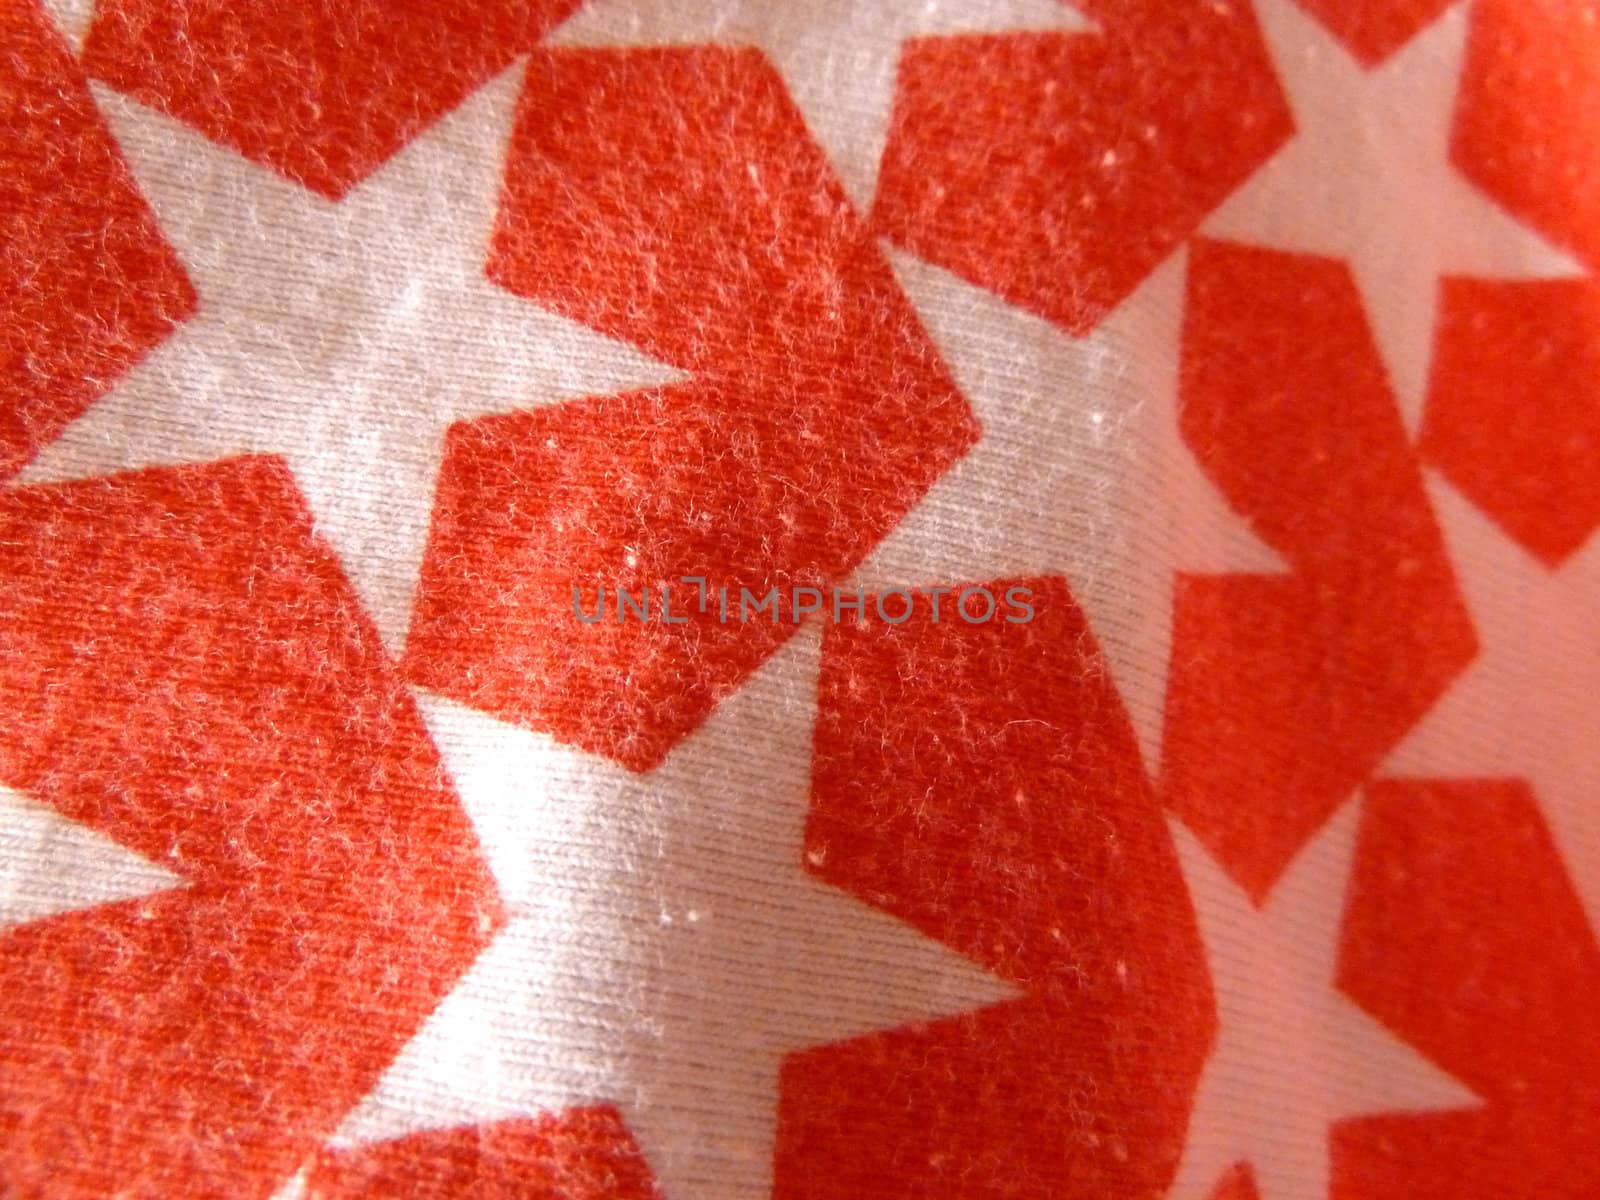 white star pattern on red fabric